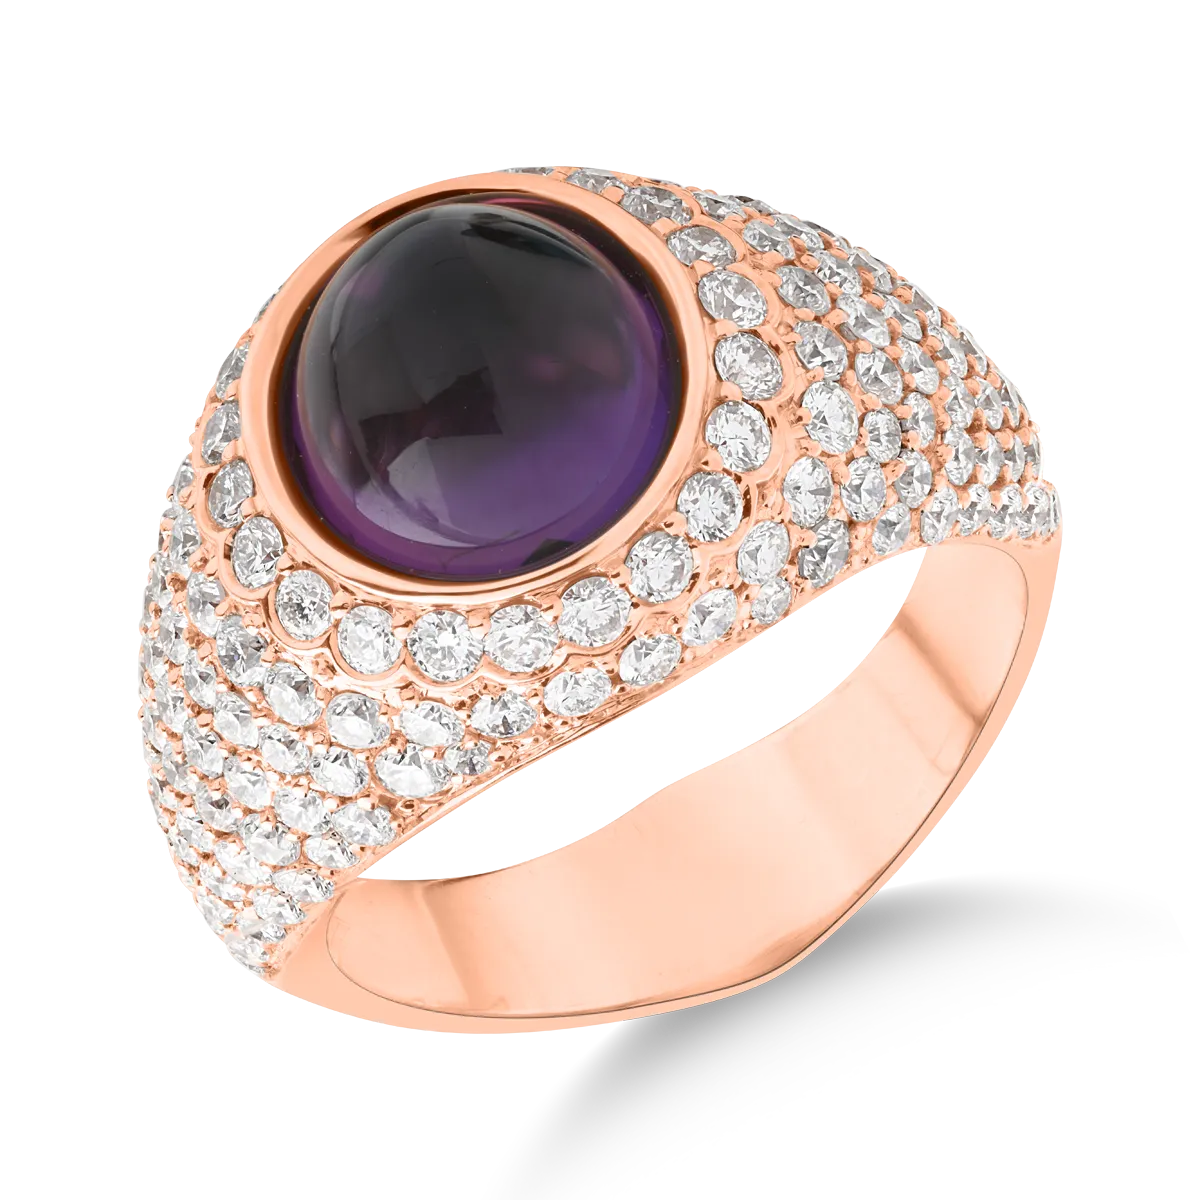 18K rose gold ring with amethyst of 3.71ct and diamonds of 2.12ct